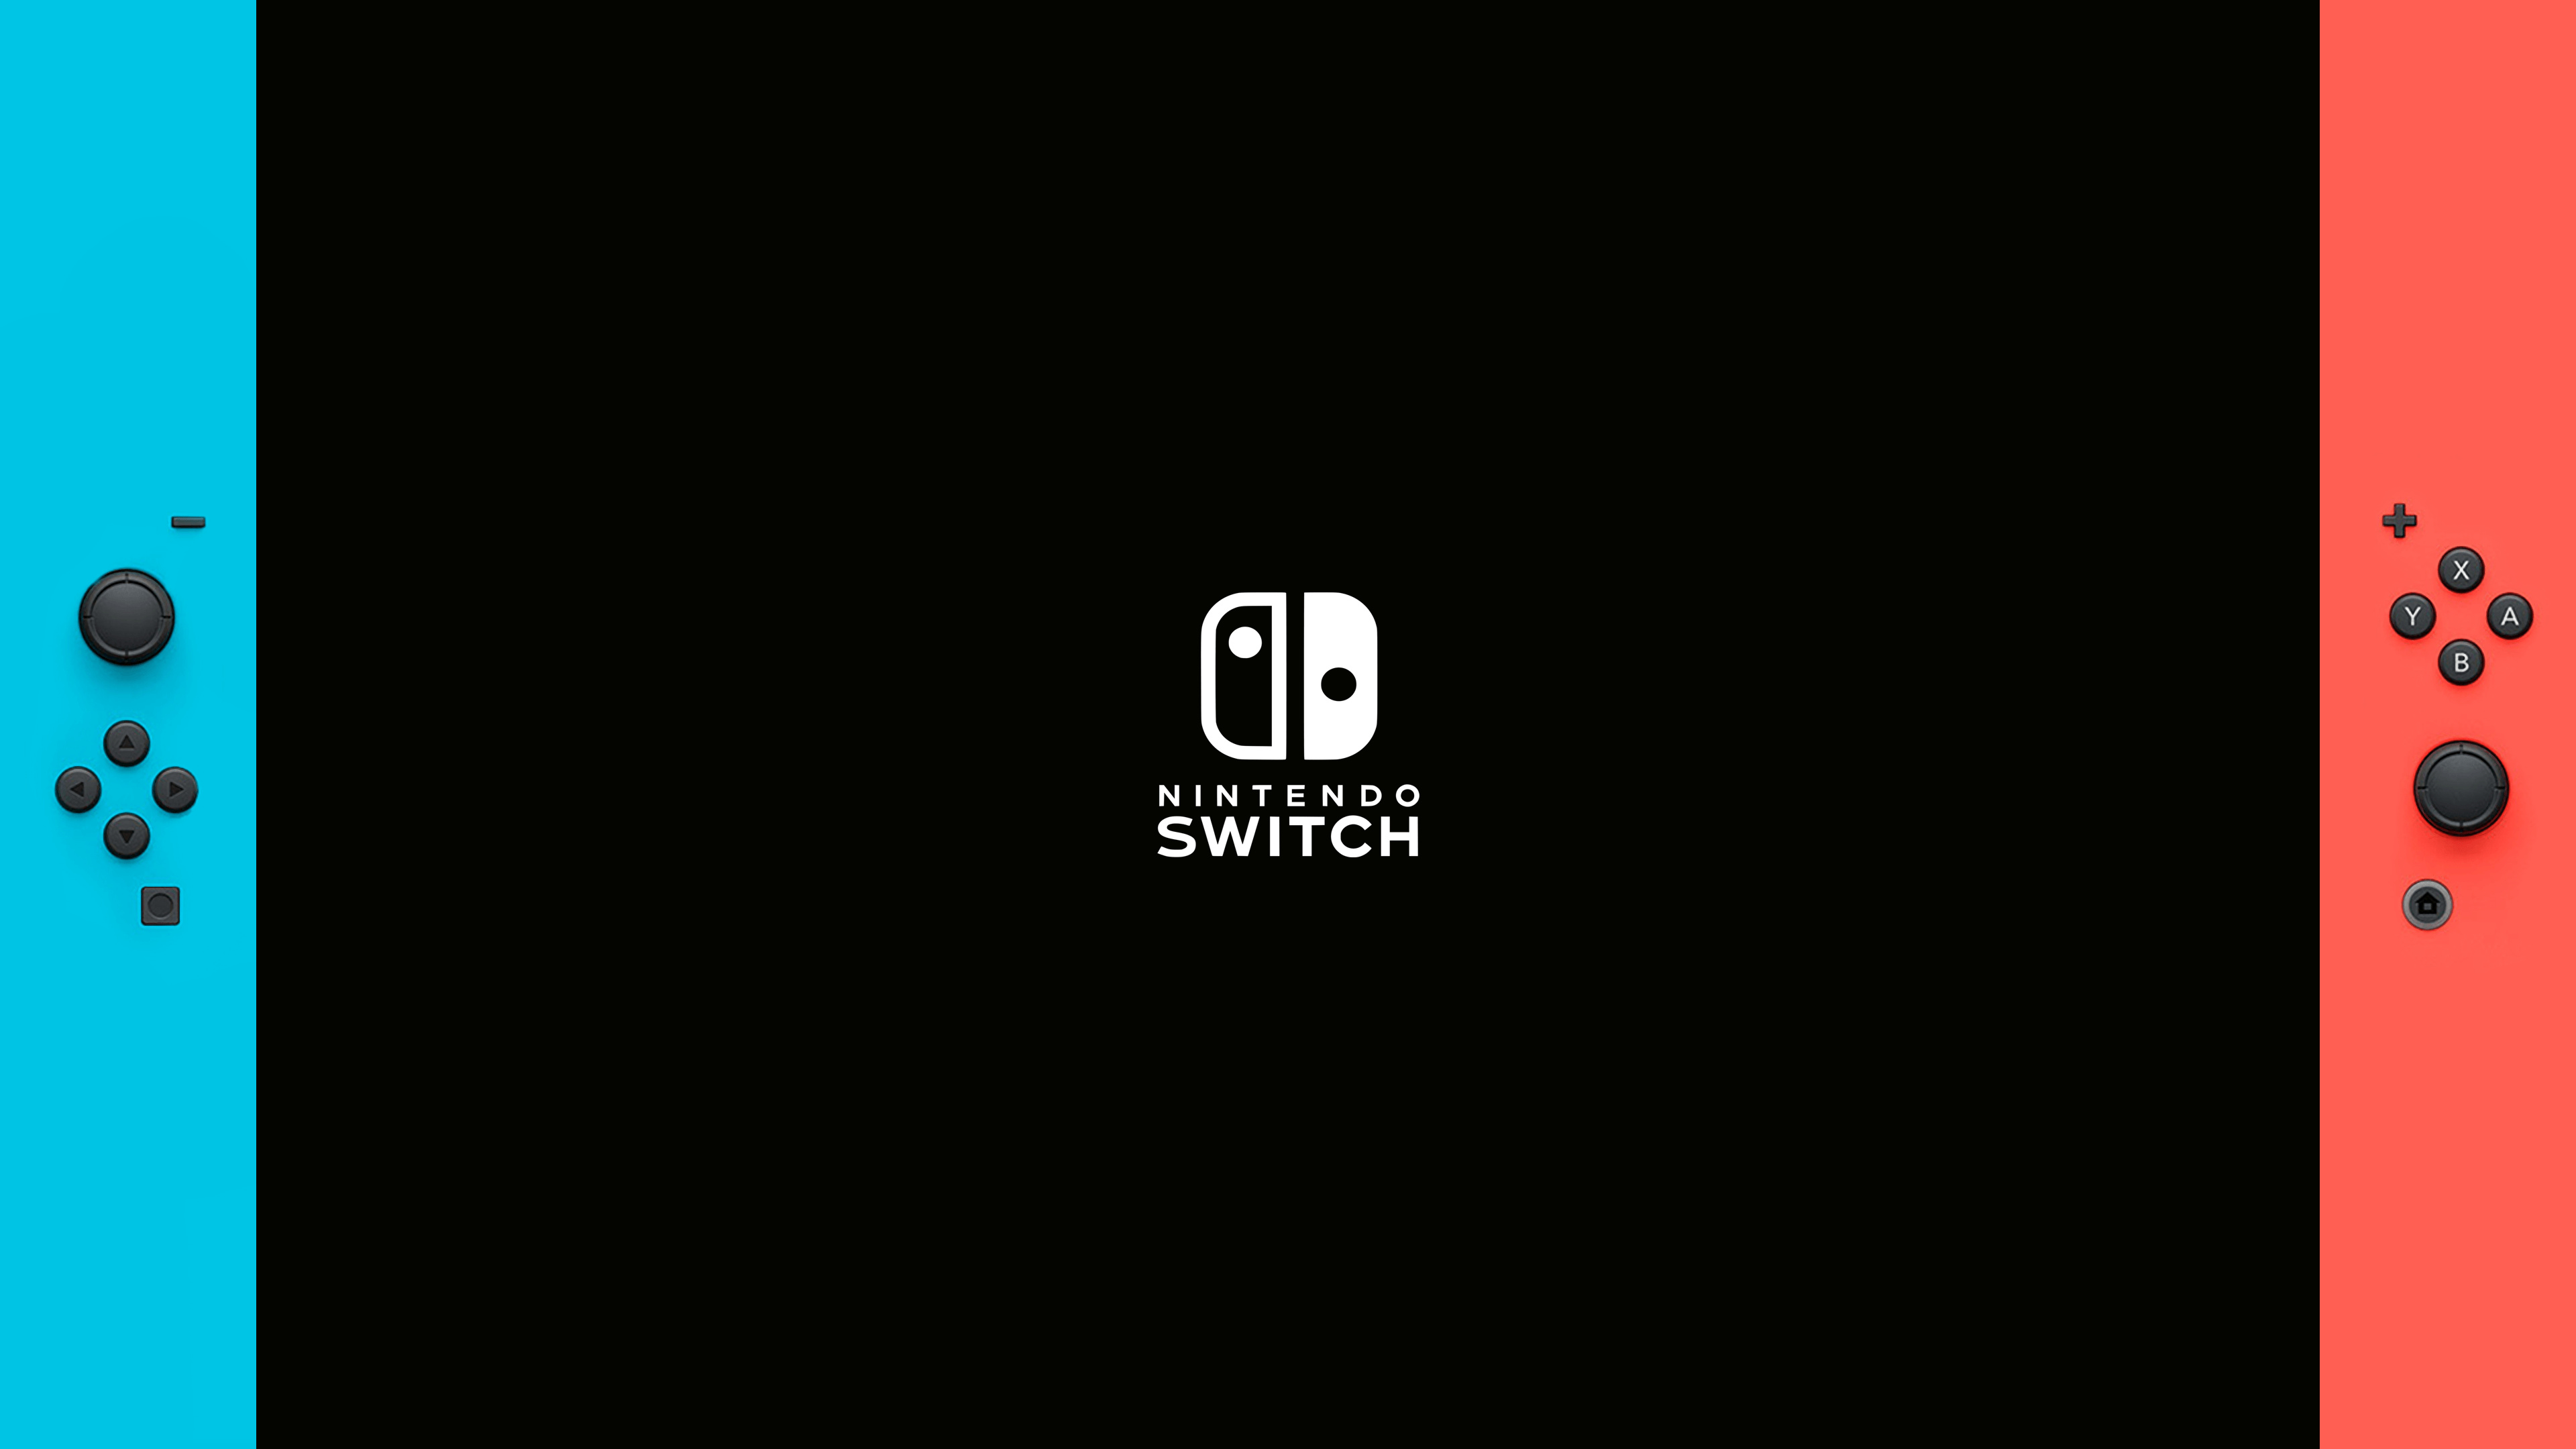 Nintendo switch, Vibrant wallpapers, Custom backgrounds, Gaming console, 3840x2160 4K Desktop